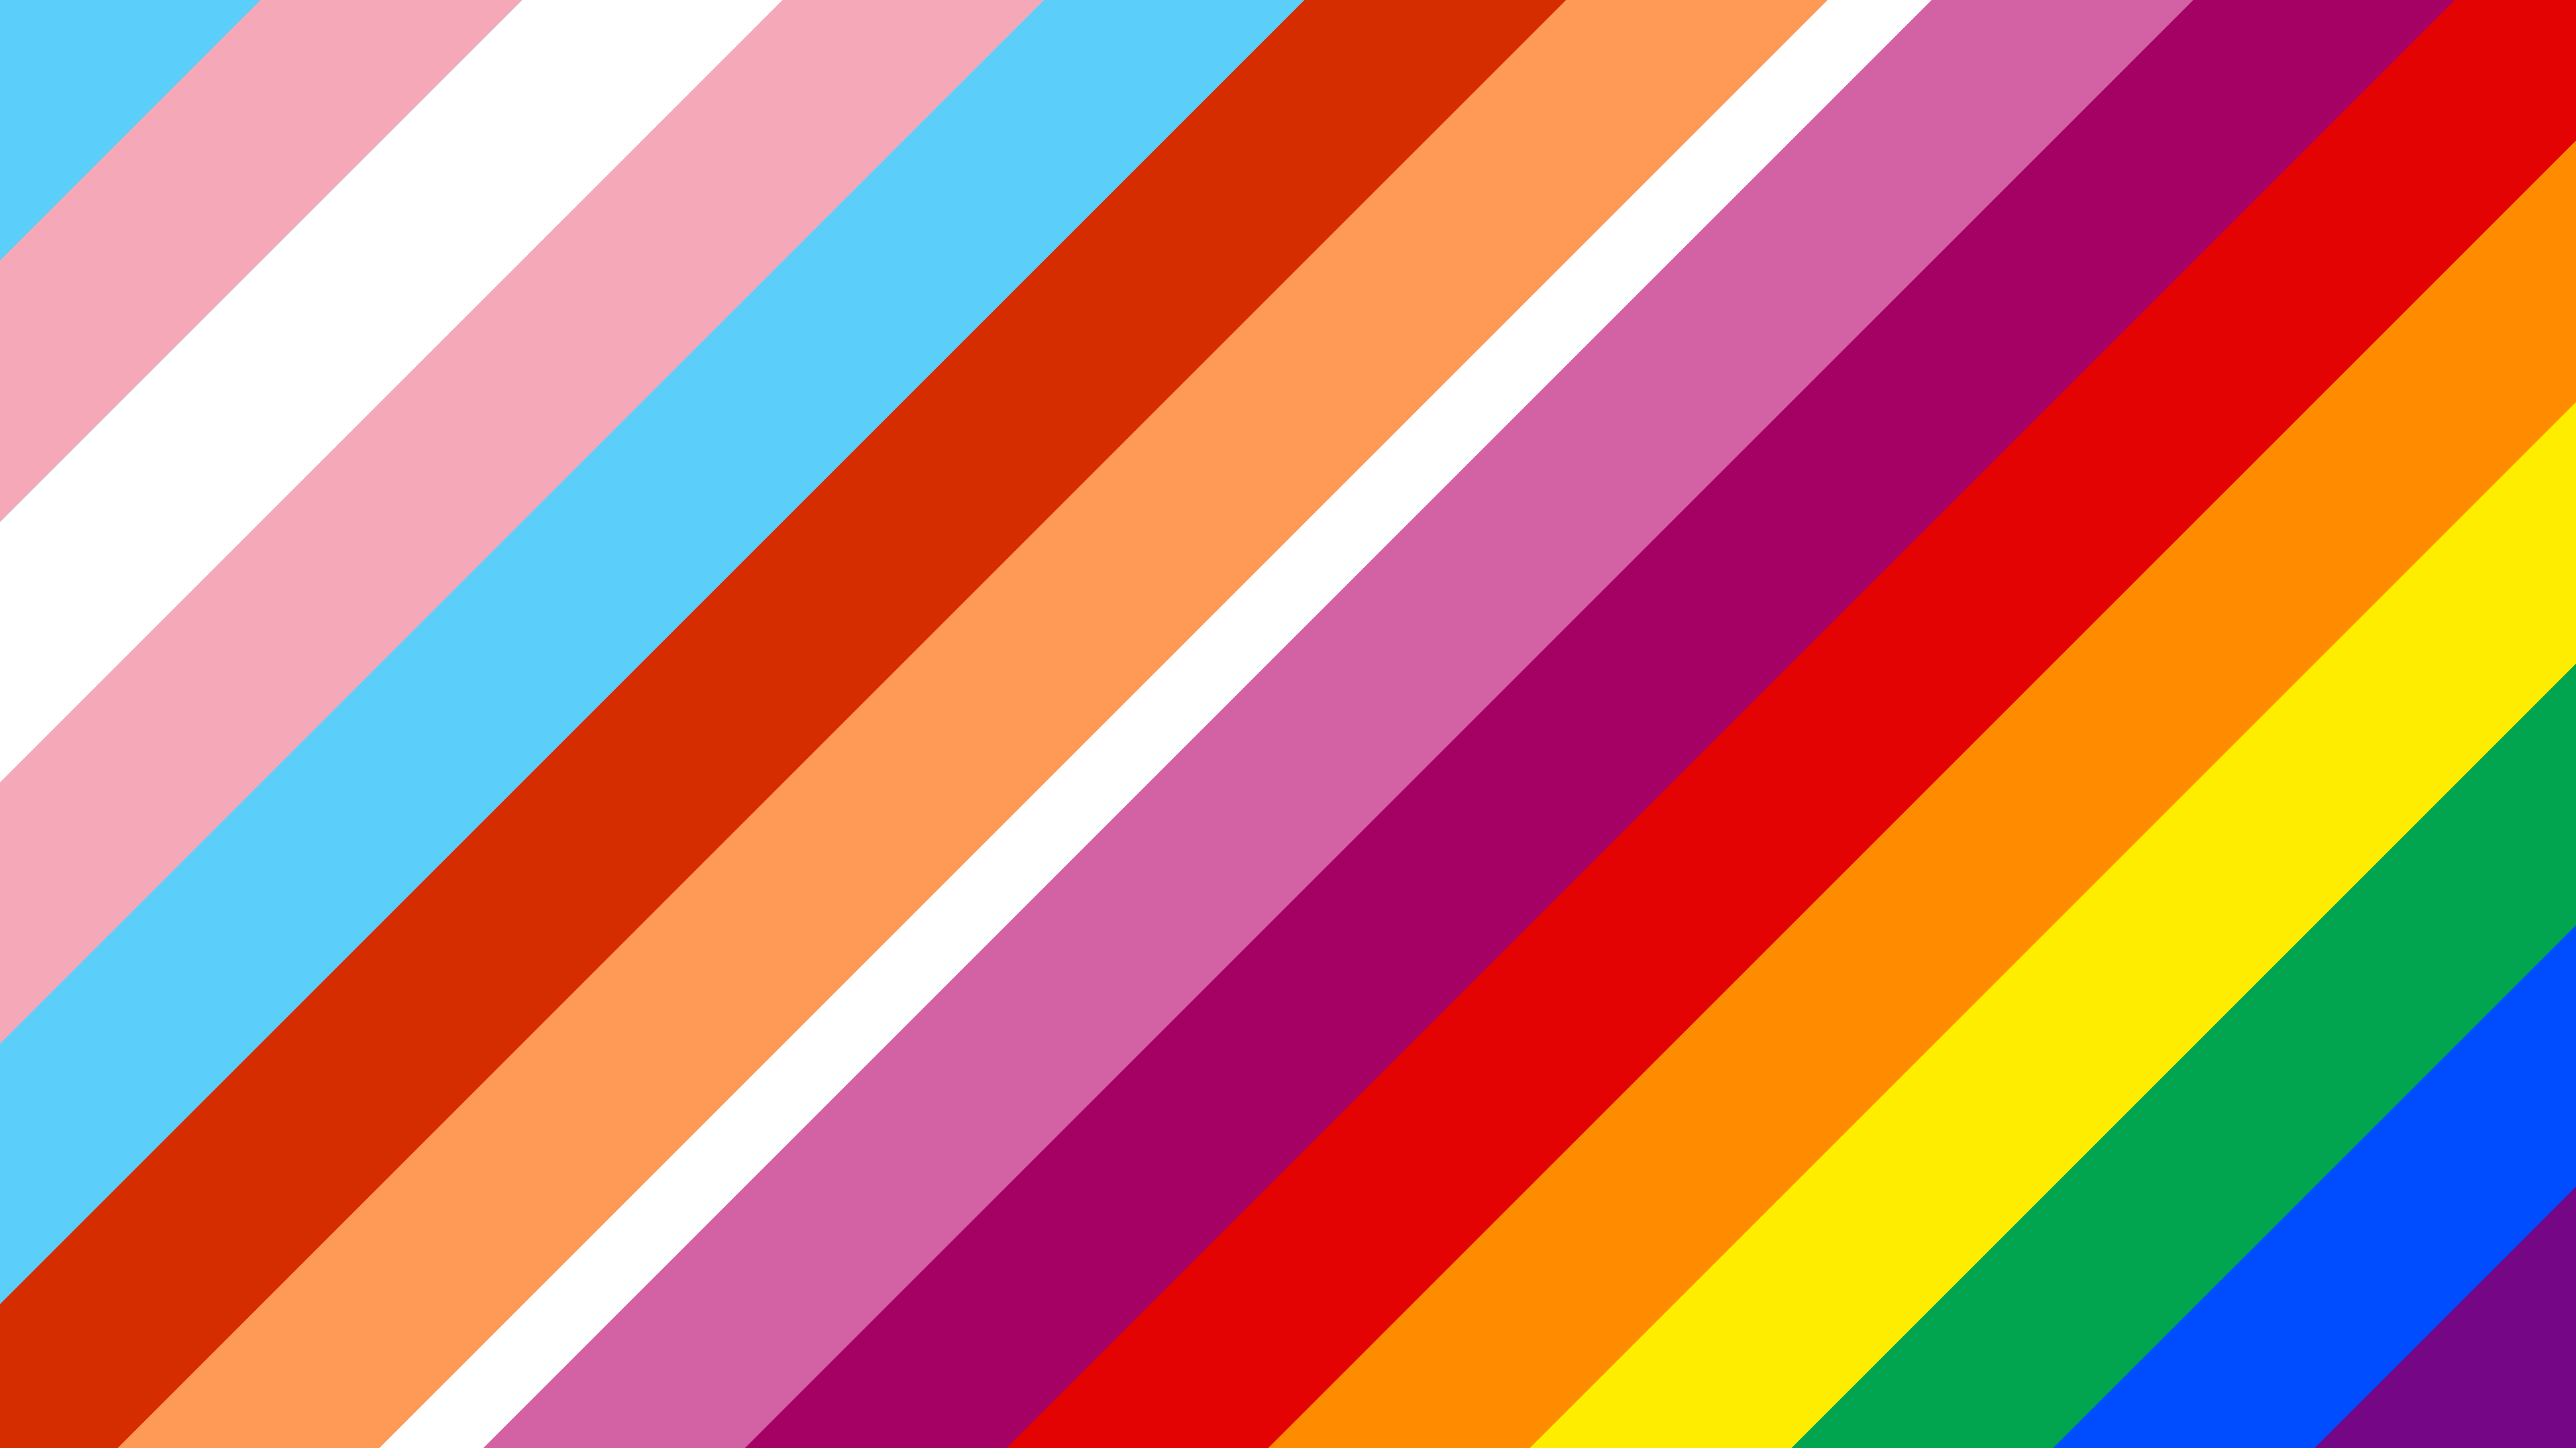 I Made A 4k Wallpaper That Has The Trans Lesbian And Gay Pride